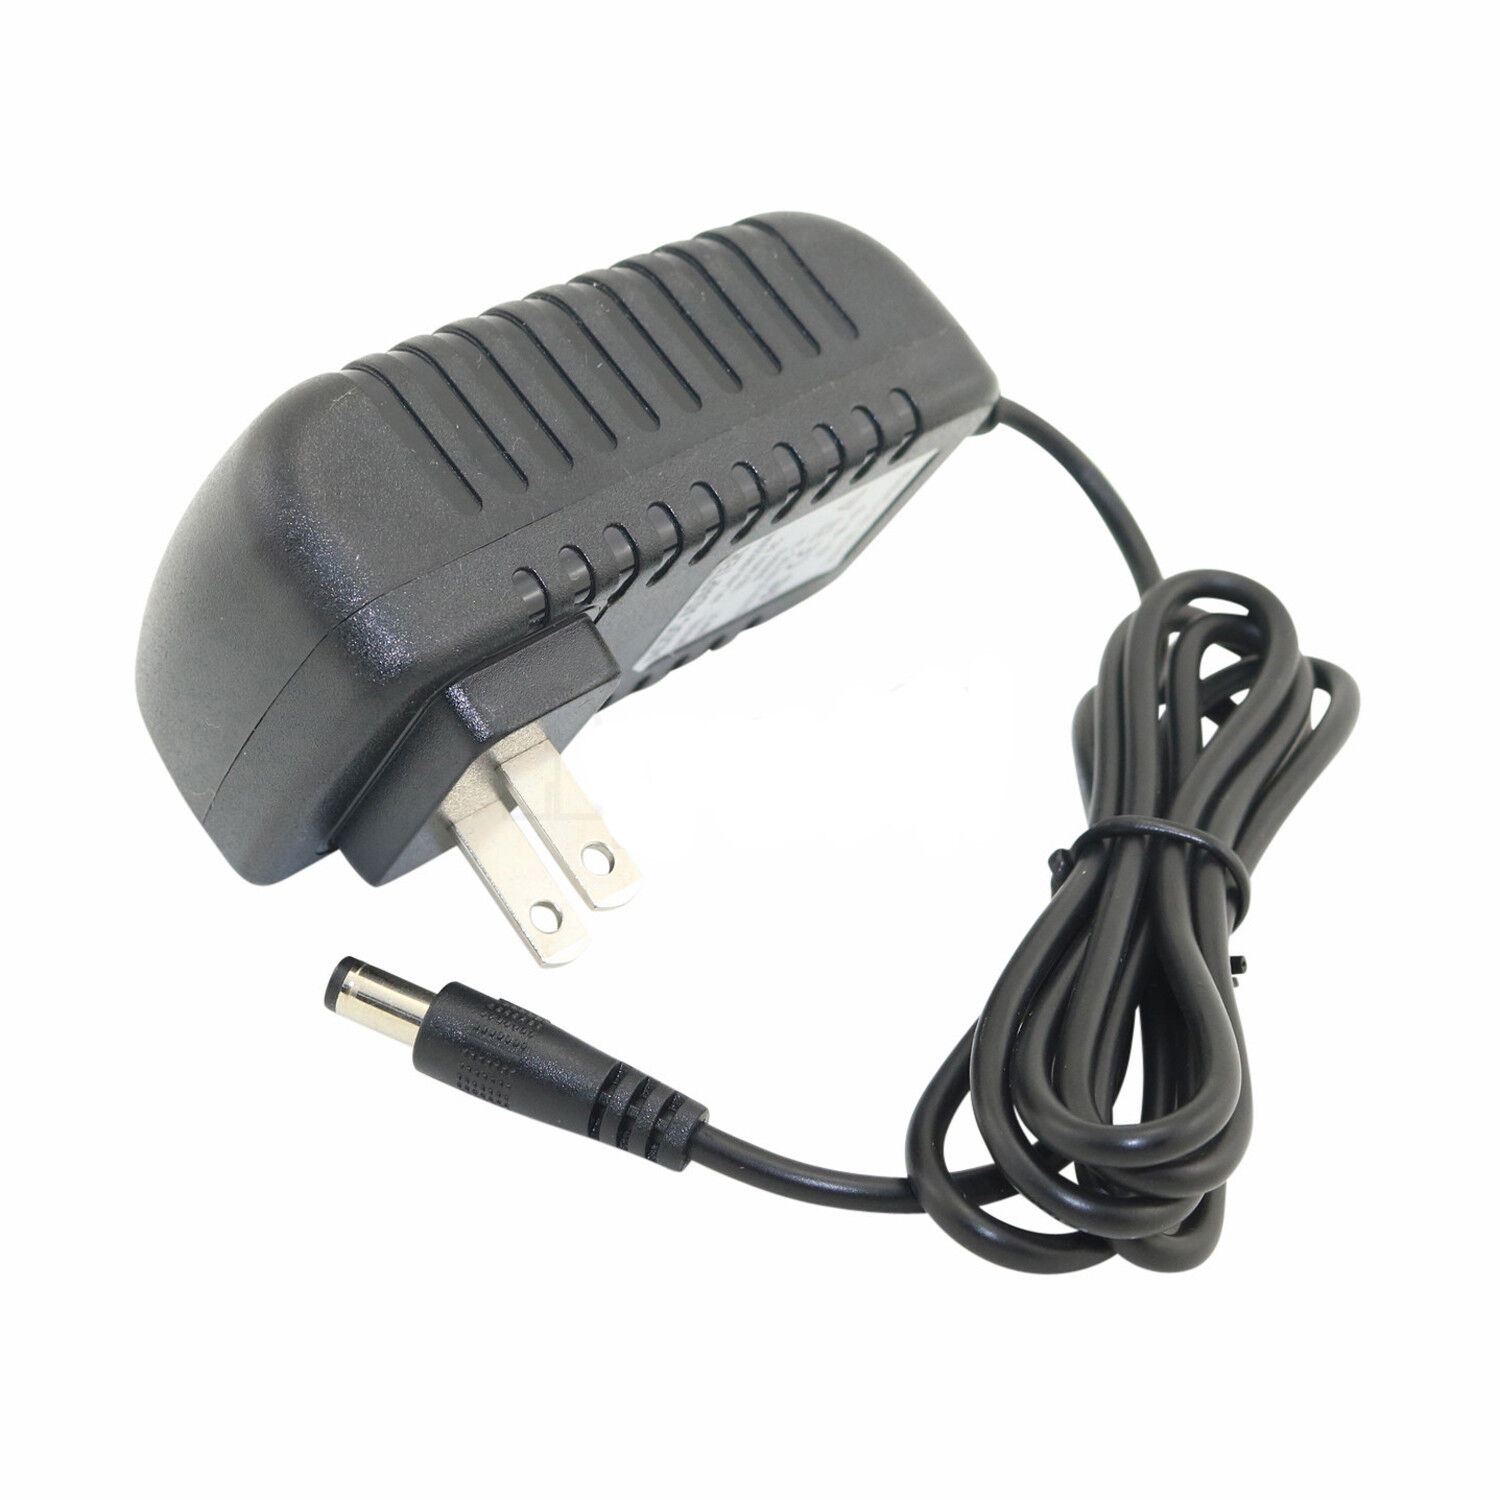 Ac Dc Adapter for Brother P-Touch PT-D210 PTD 210 PTD220 PT-D200VP PTH110 Label Maker, UL Listed Power Supply Charger fo